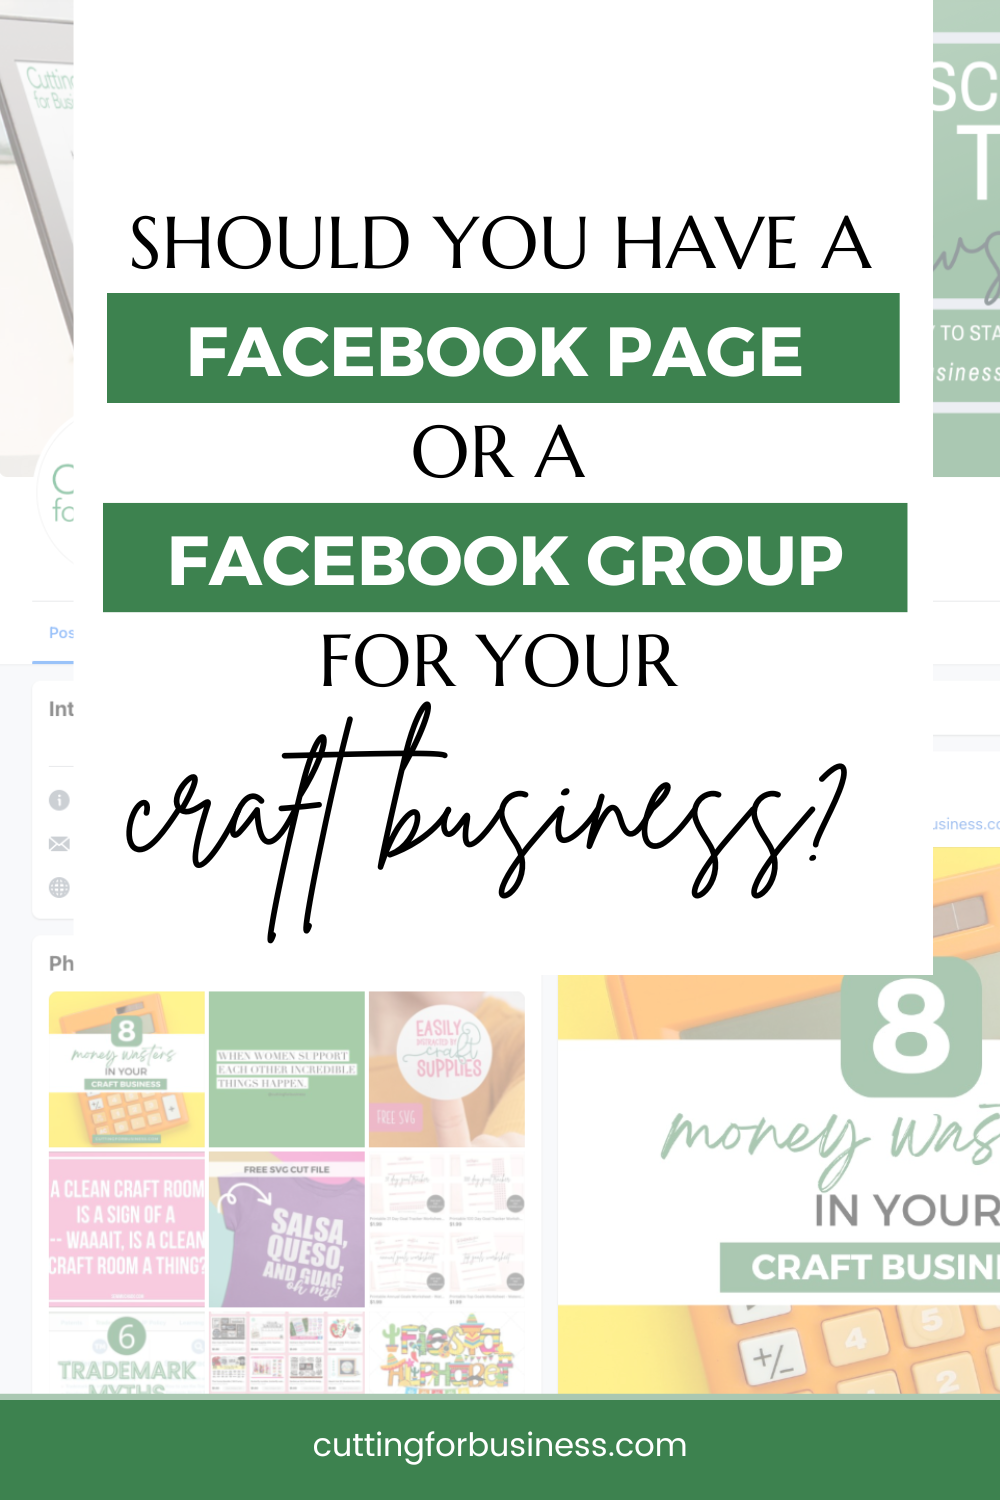 Should You Have a Facebook Page or a Facebook Group for Your Craft Business? - cuttingforbusiness.com.